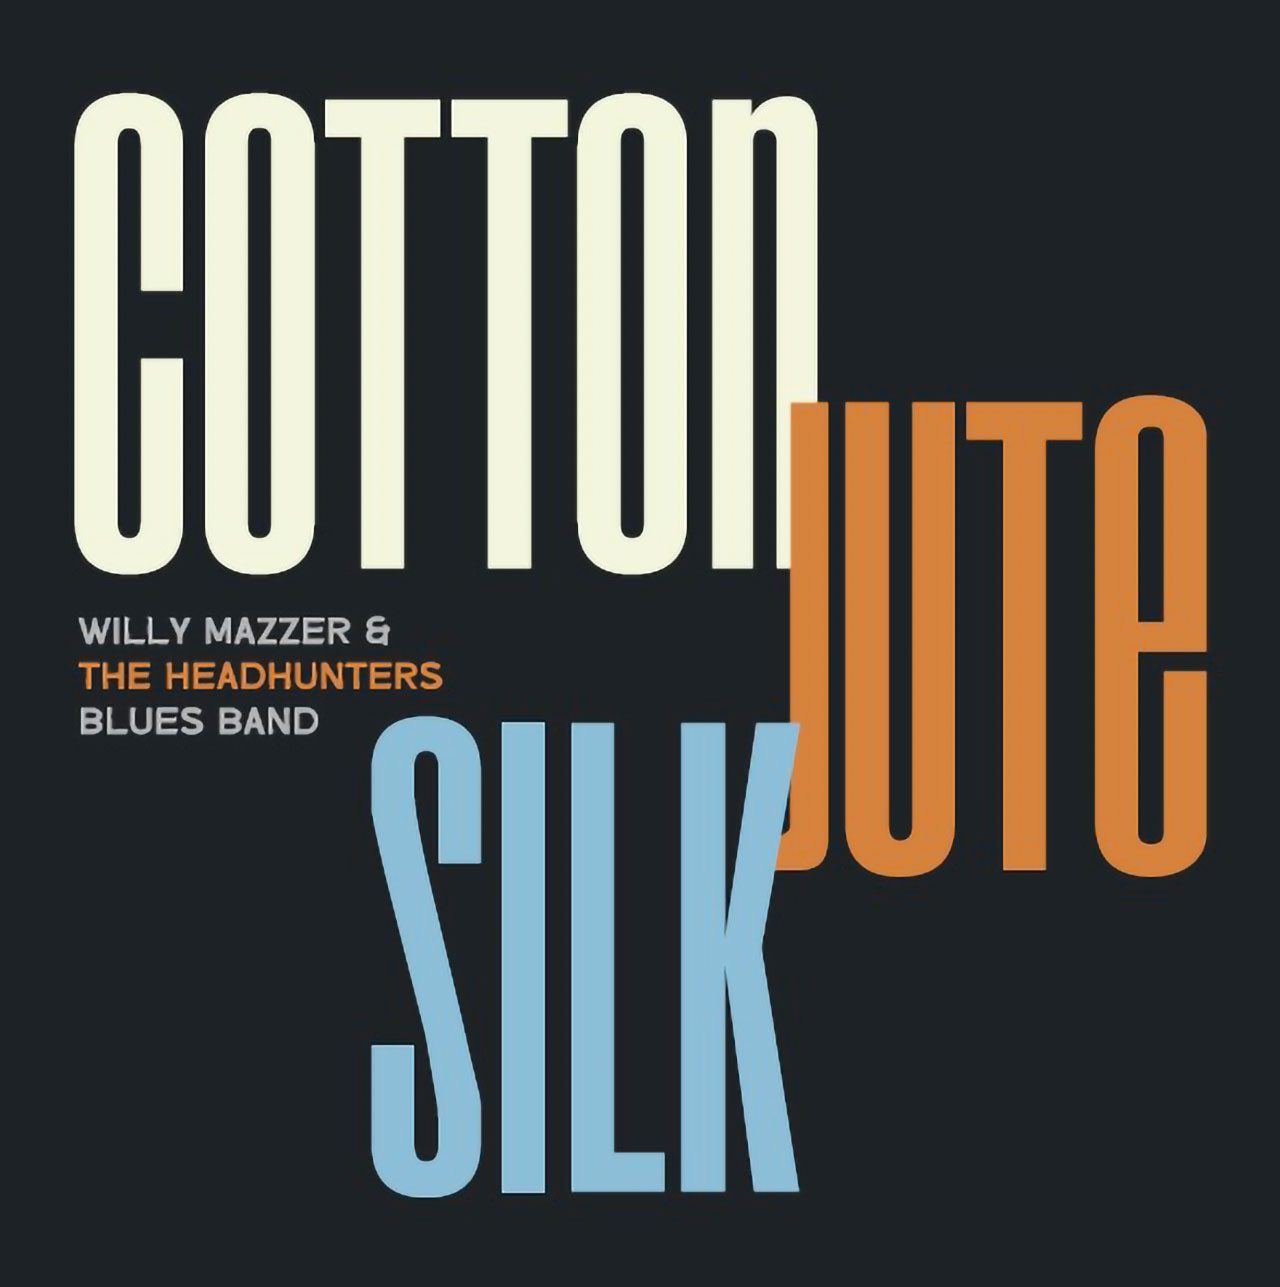 WILLY MAZZER & THE HEADHUNTERS BLUES BAND ‘COTTON, JUTE & SILK’ cover album